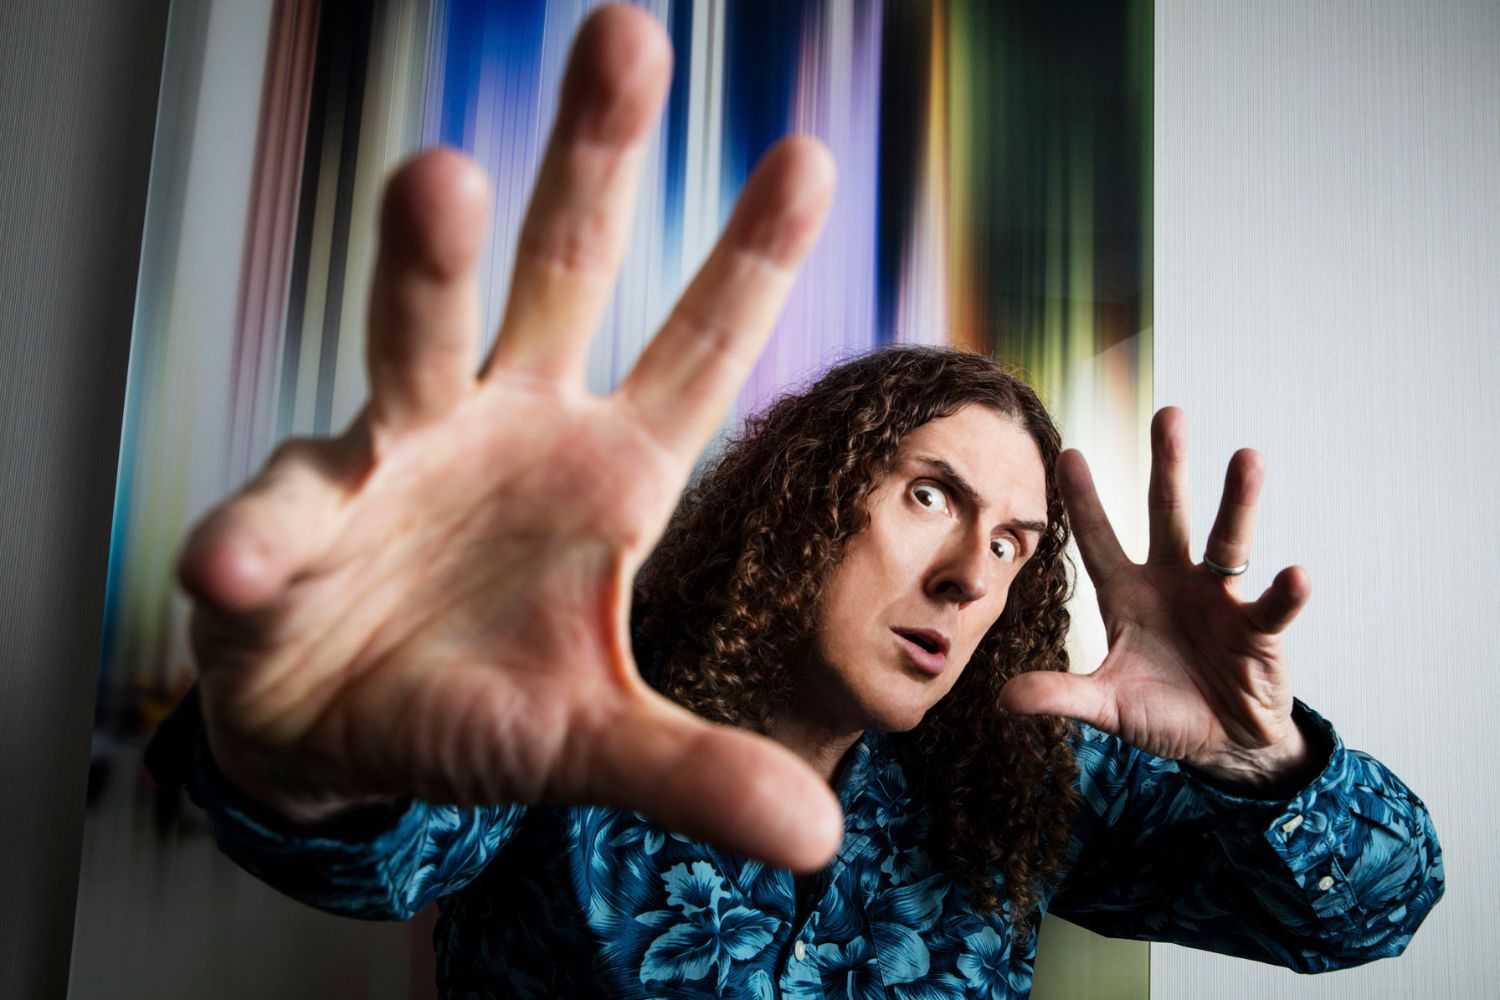 Weird Al Yankovic is making his longanticipated return to the stage